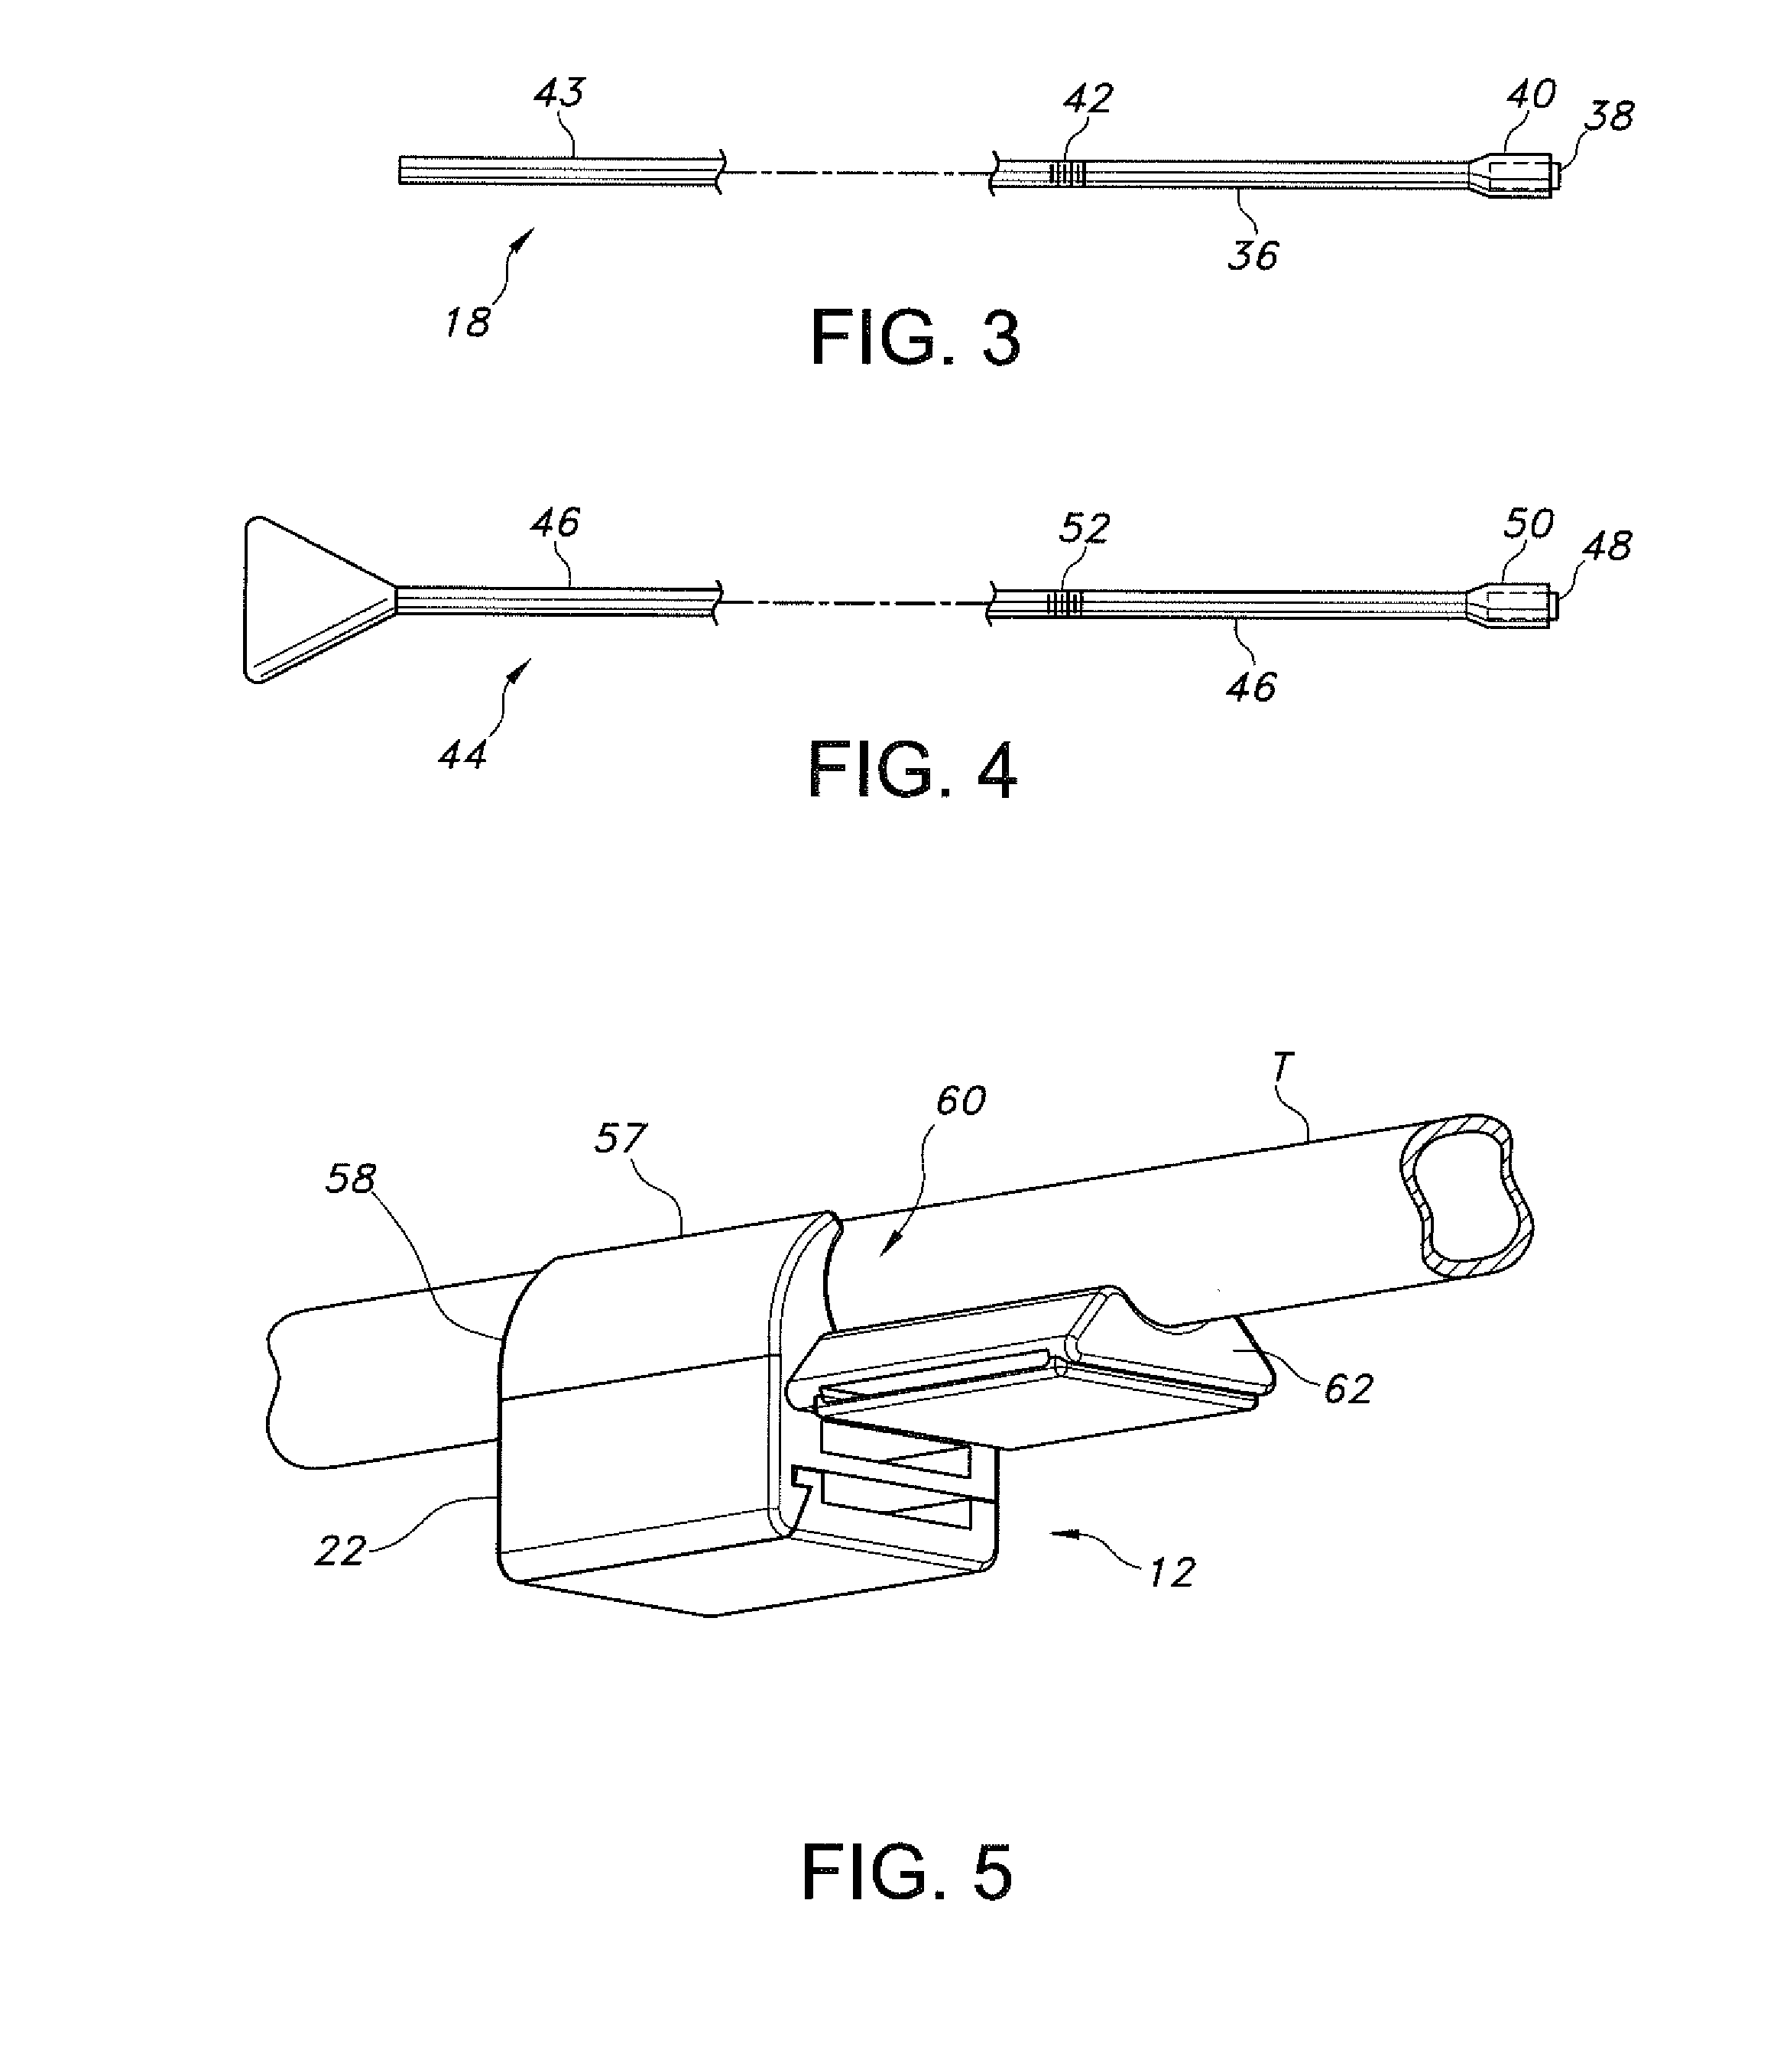 Bridle system for placing and securing a nasal tube in a patient